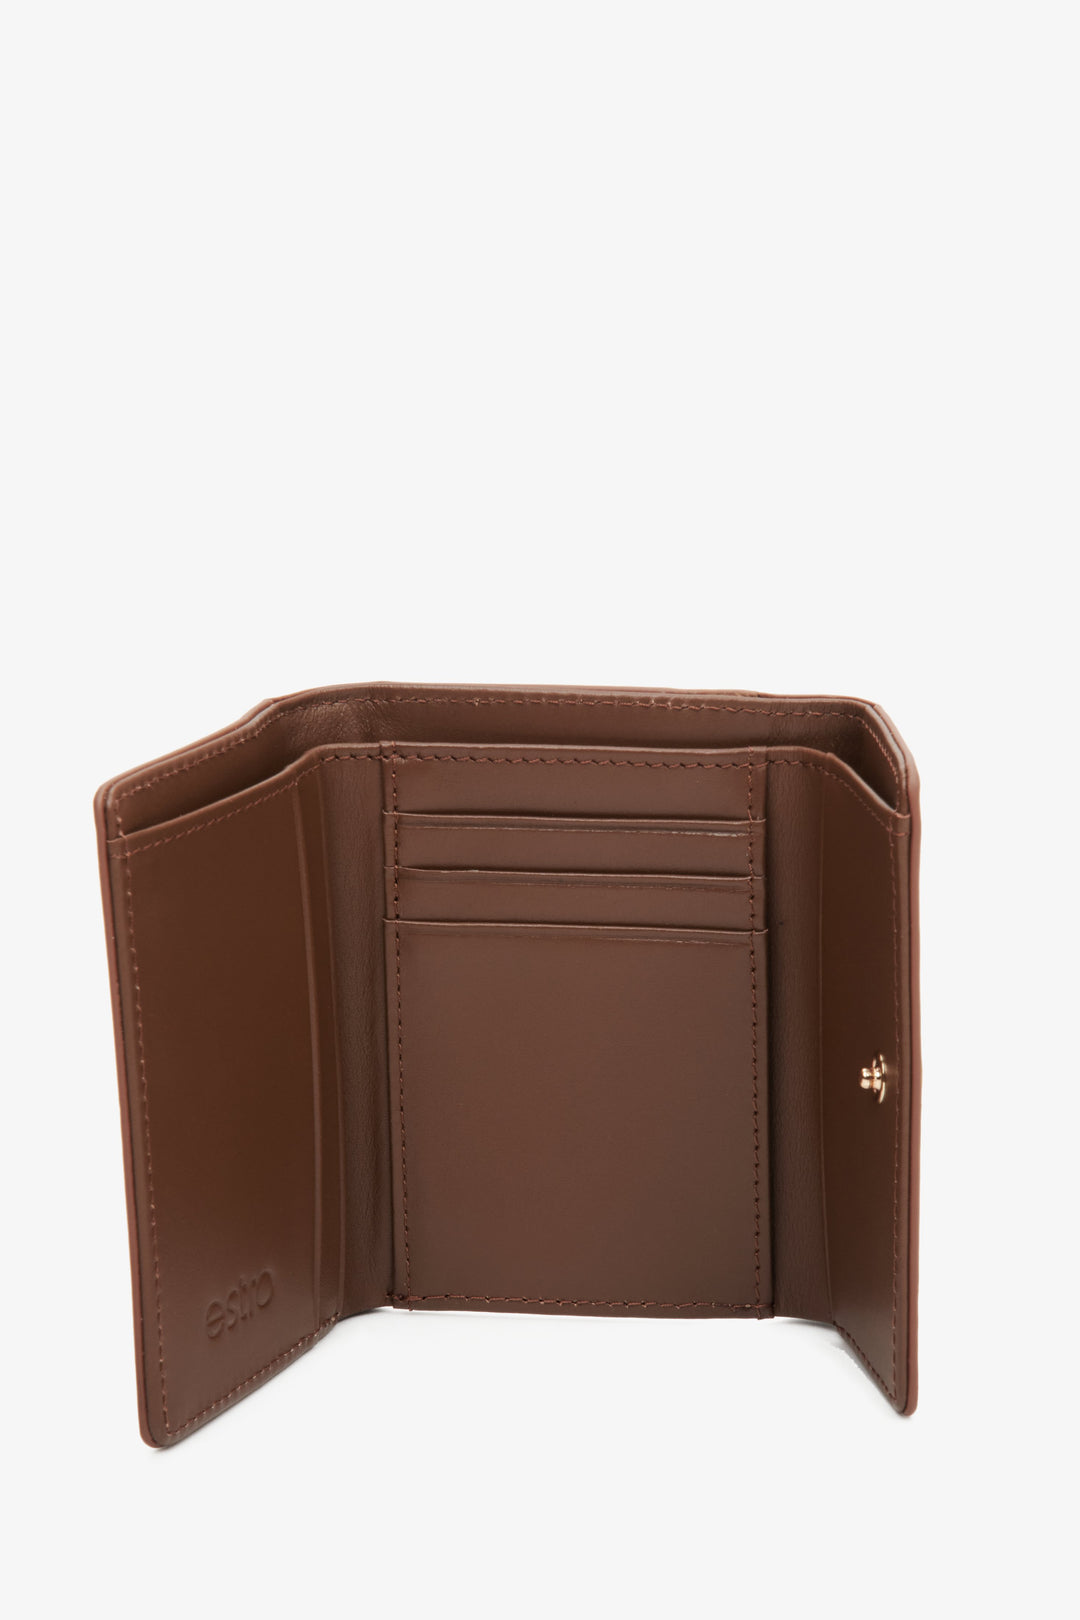 Women's tri-fold wallet made of genuine leather in brown color - interior view of the model.